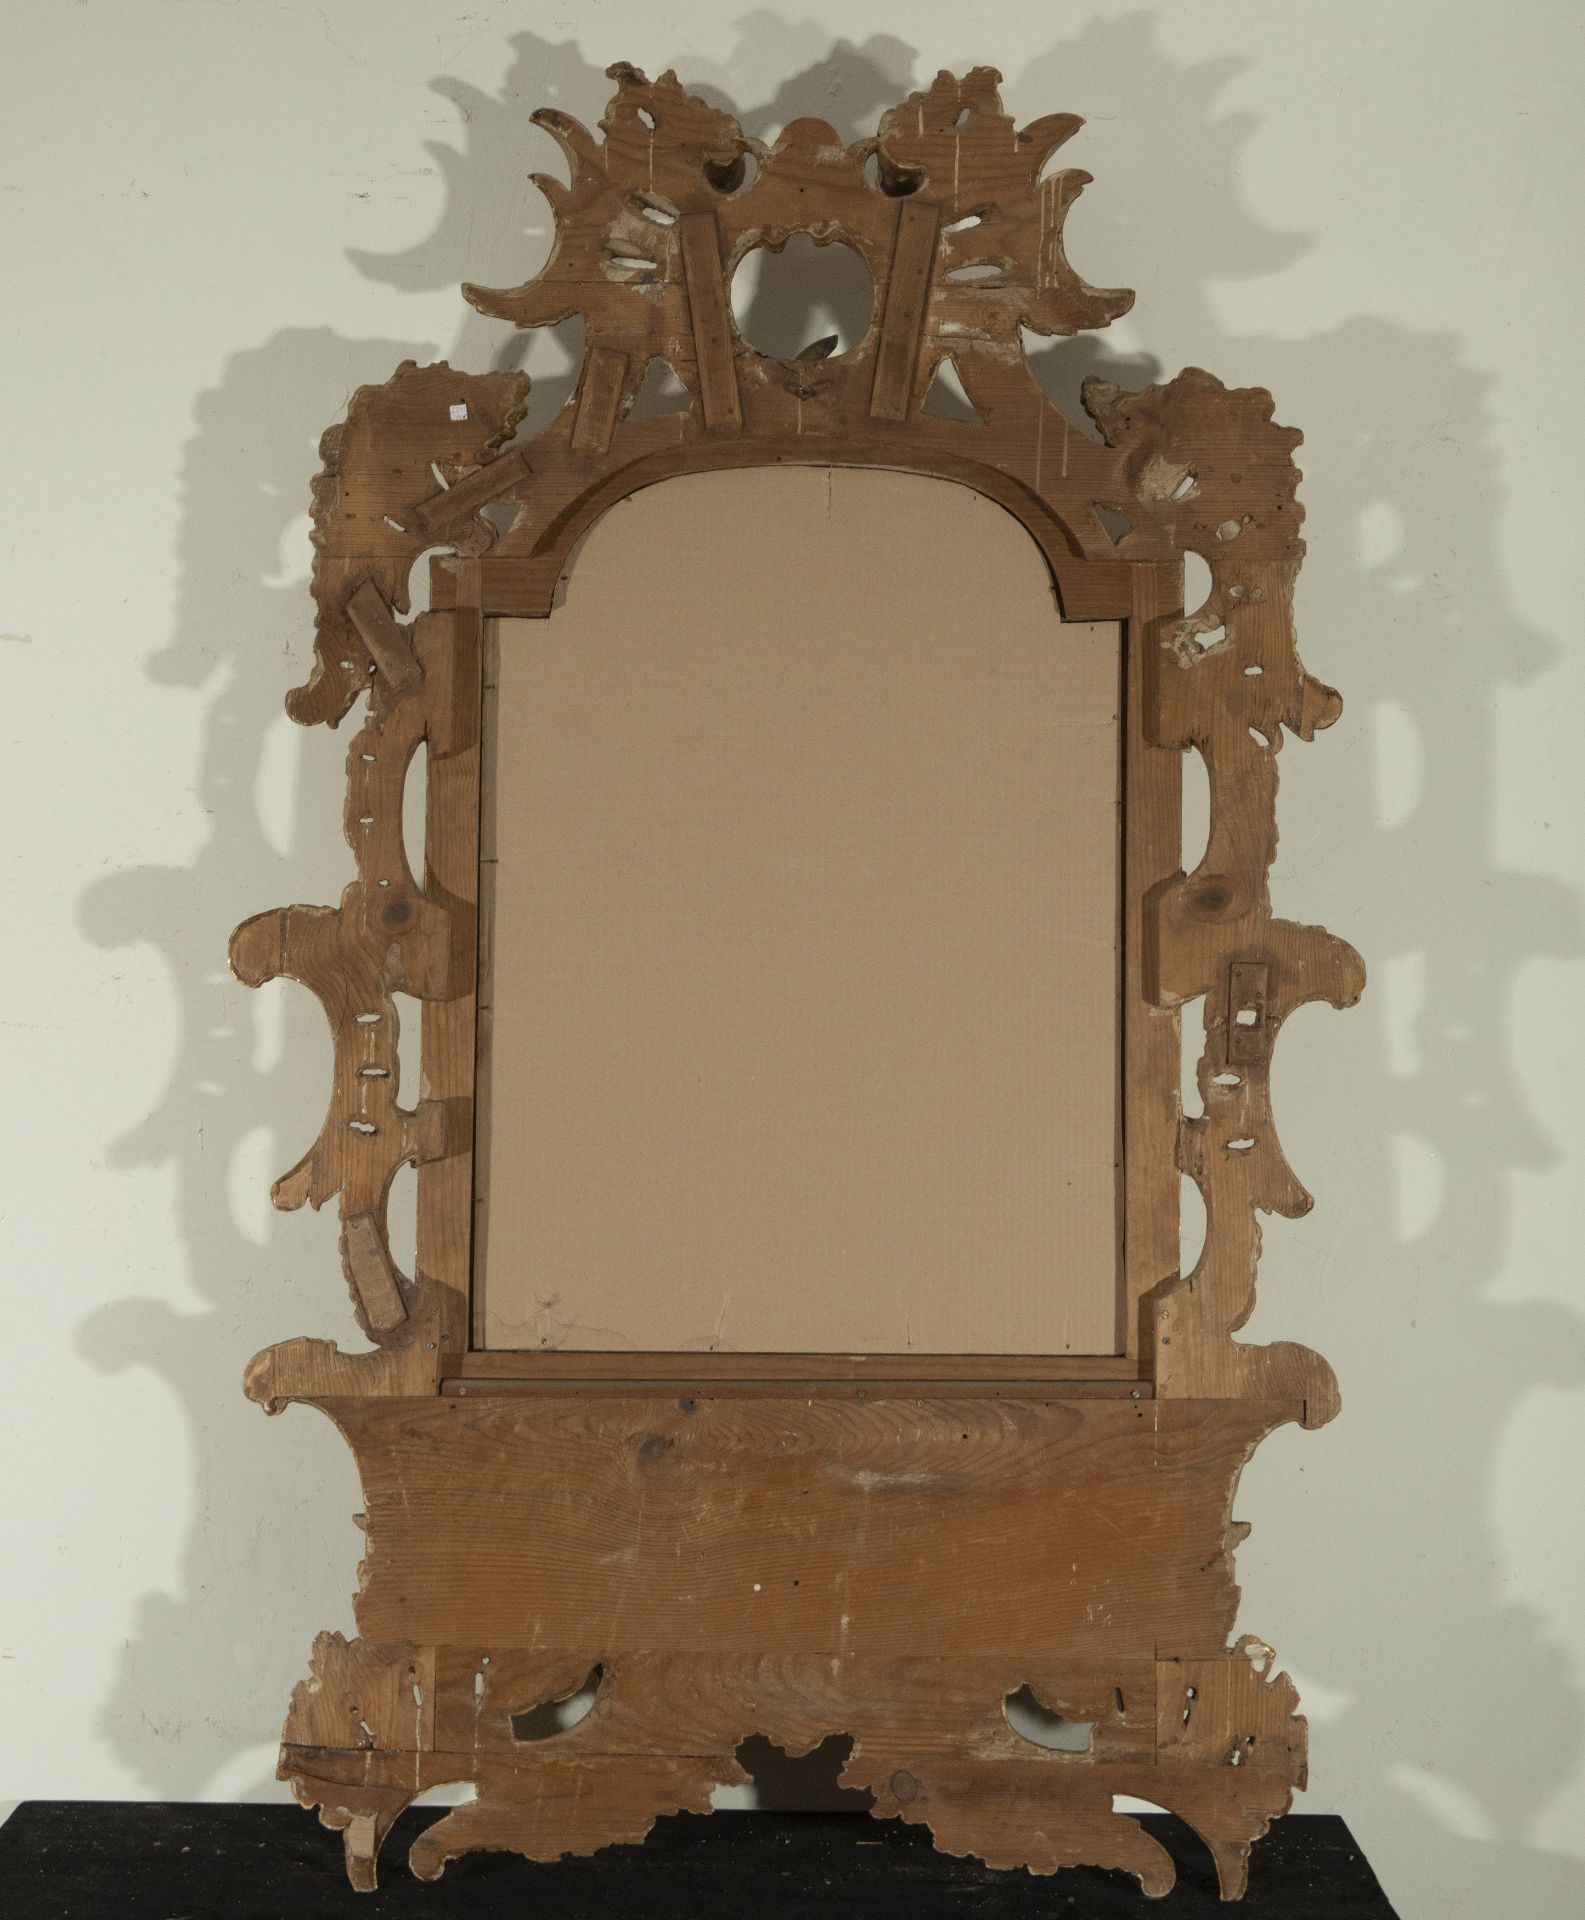 Antique Spanish frame from the 17th century transformed into a carved wood mirror - Bild 6 aus 6